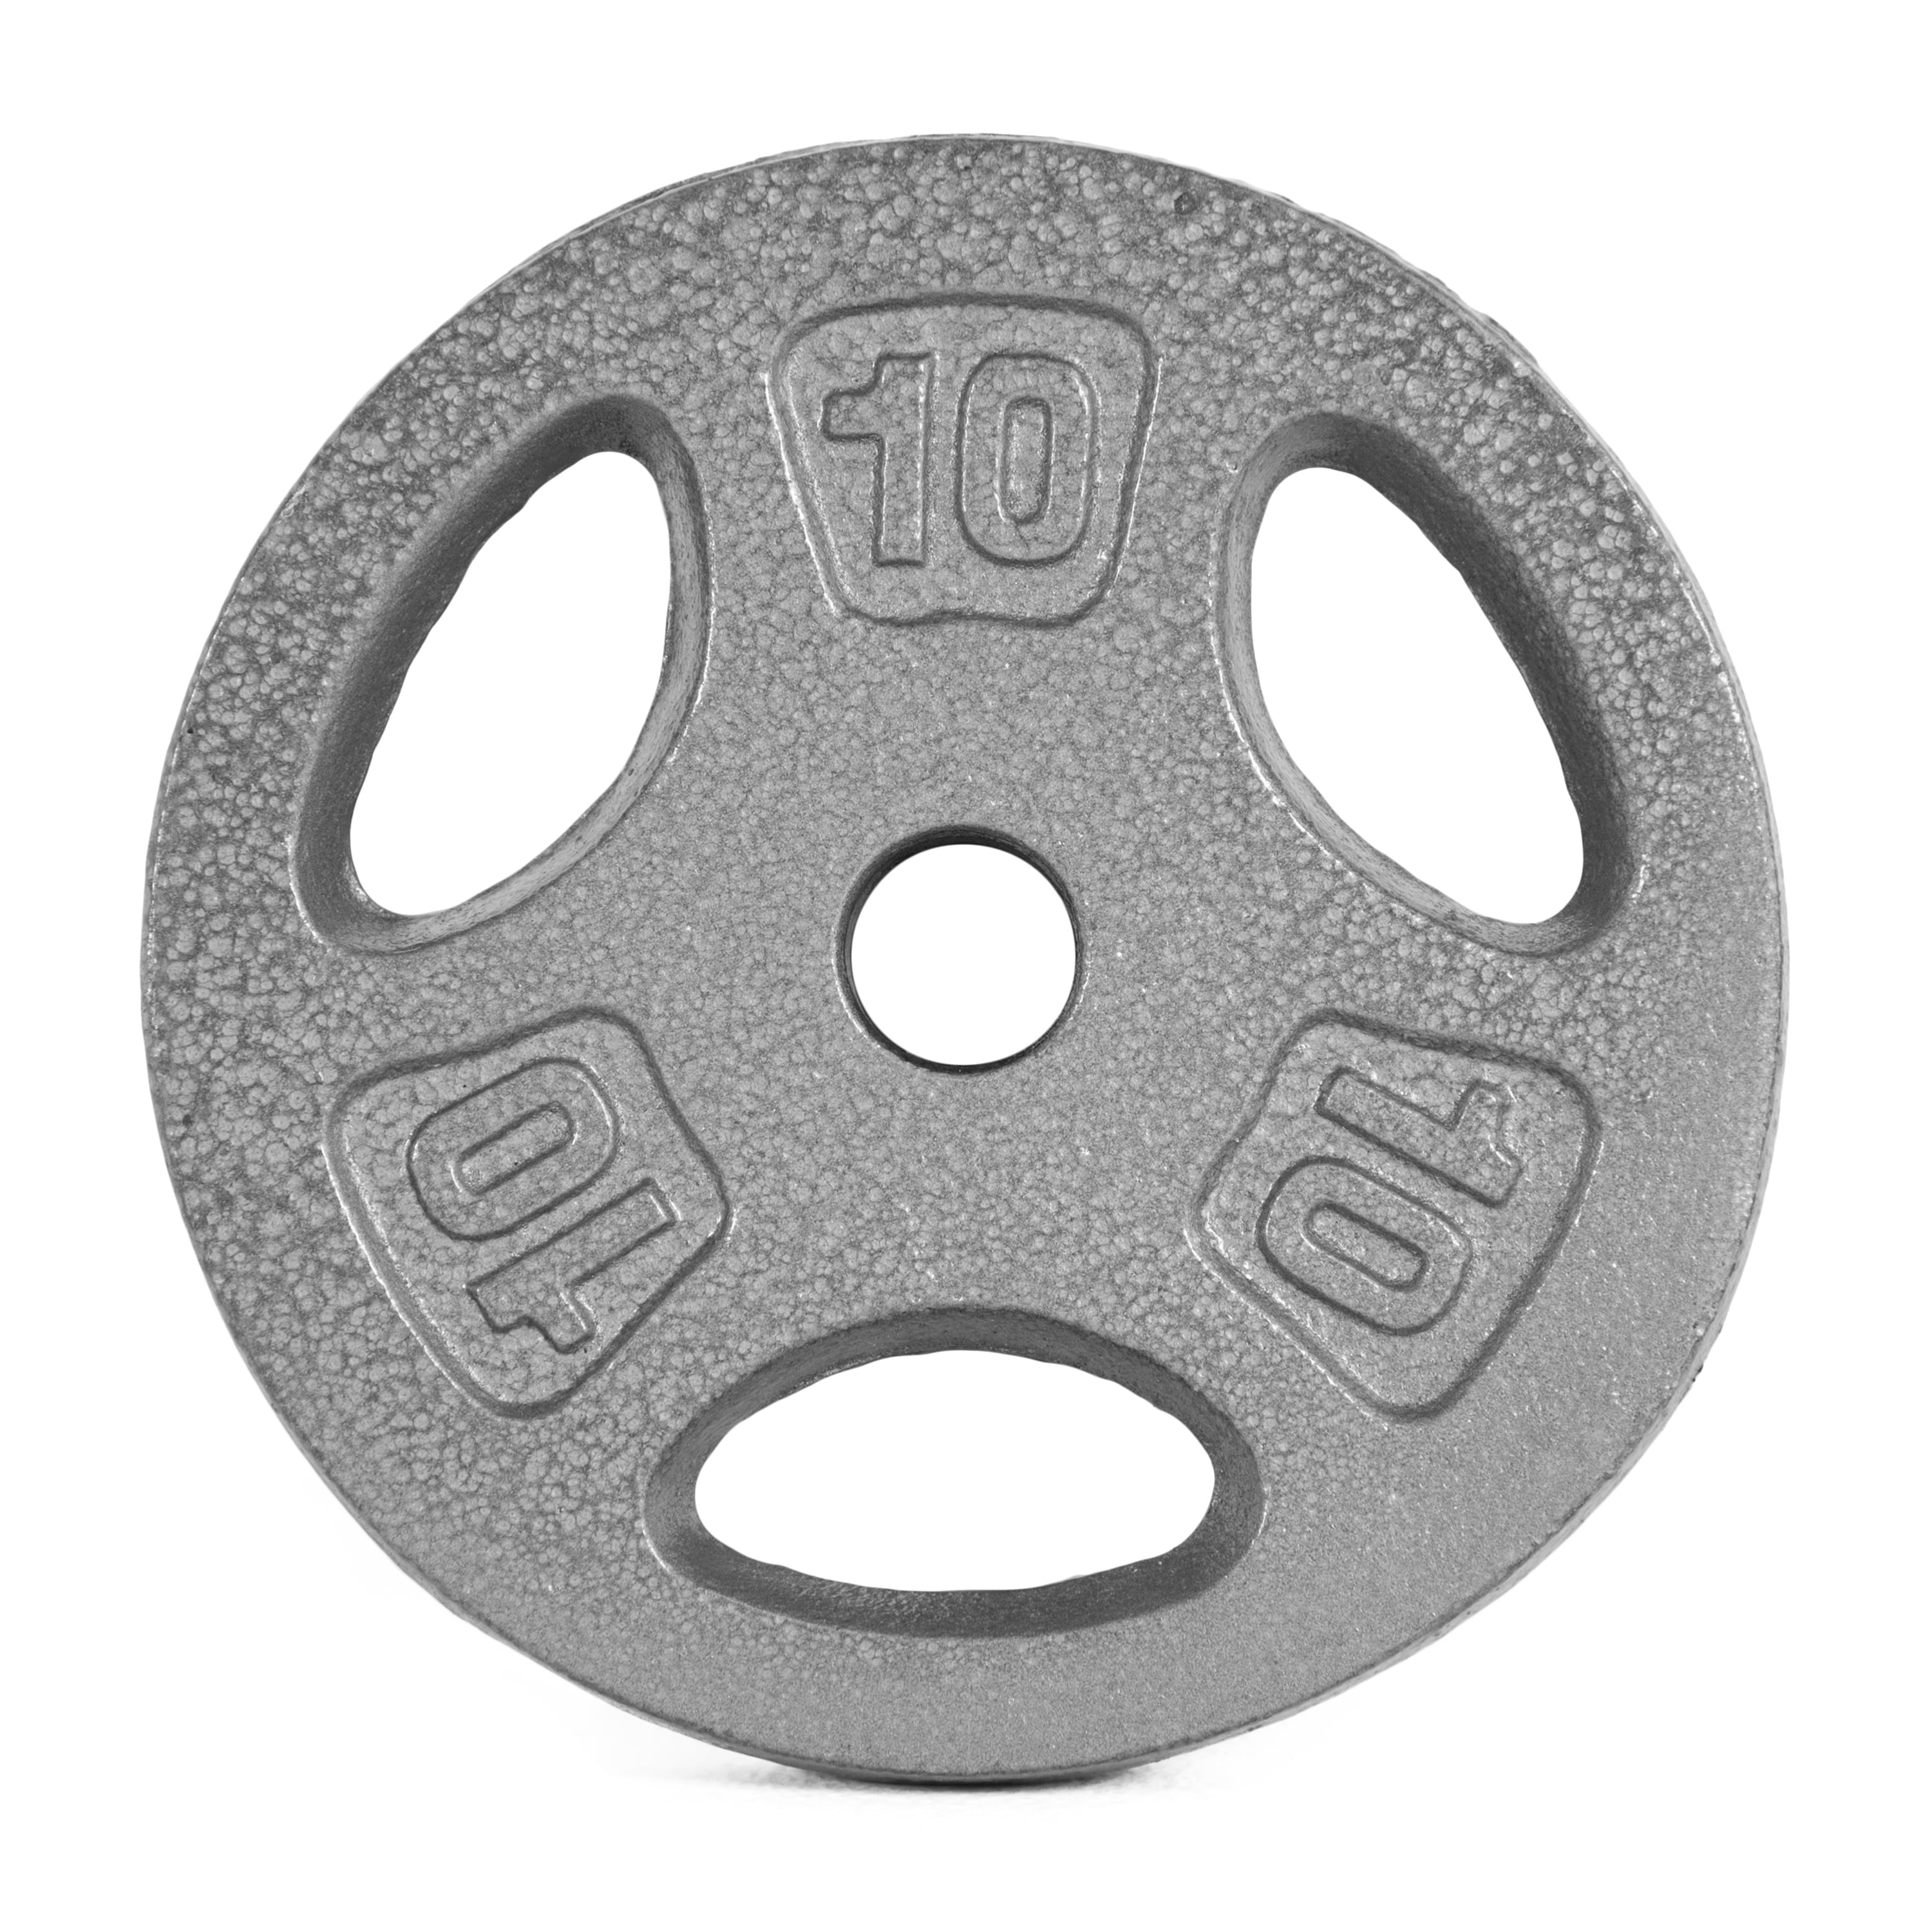 New CAP 100 Lb Vinyl Weight Set Barbell 1 Inch Plate Standard FREE SHIPPING! 